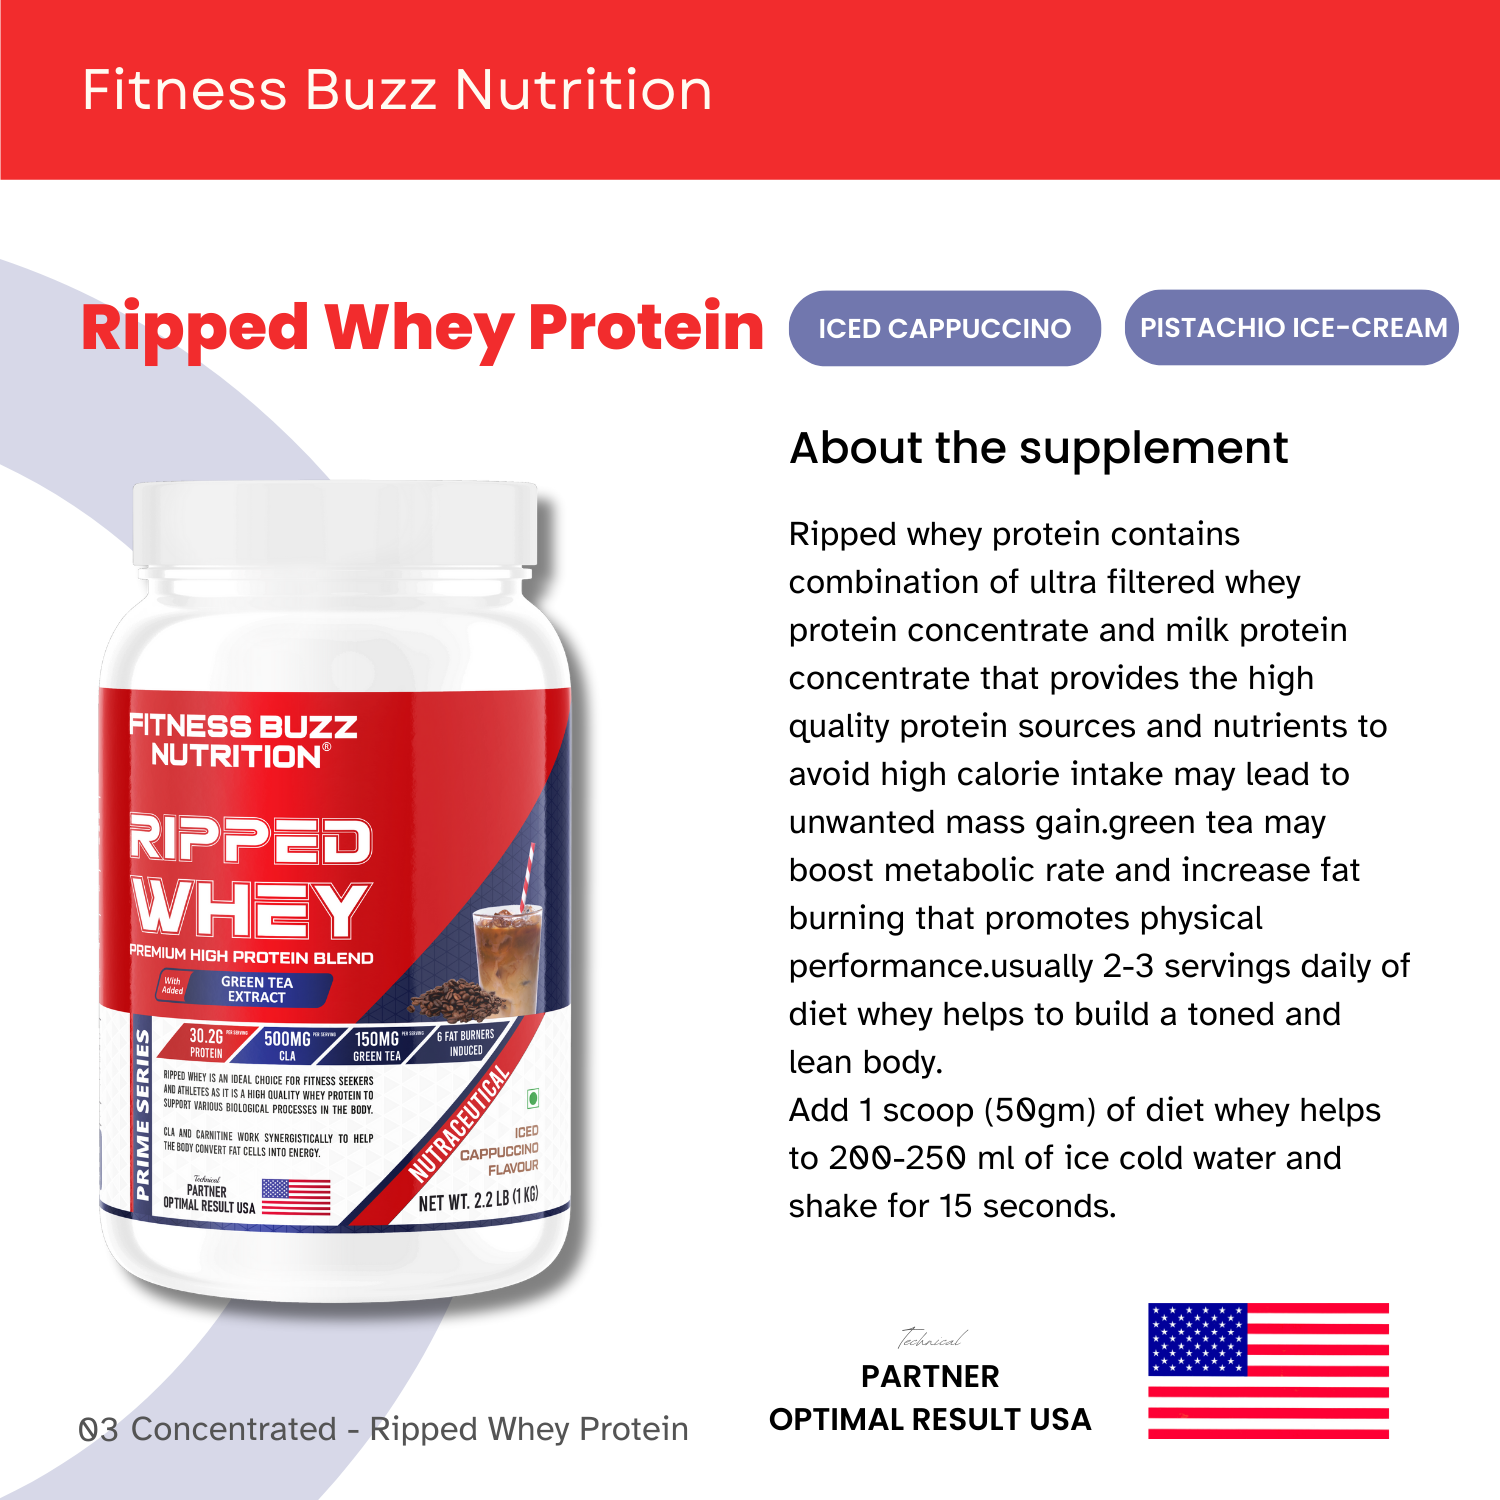 FITNESS BUZZ NUTRITION RIPPED WHEY 1KG (ICED CAPPUCCINO)